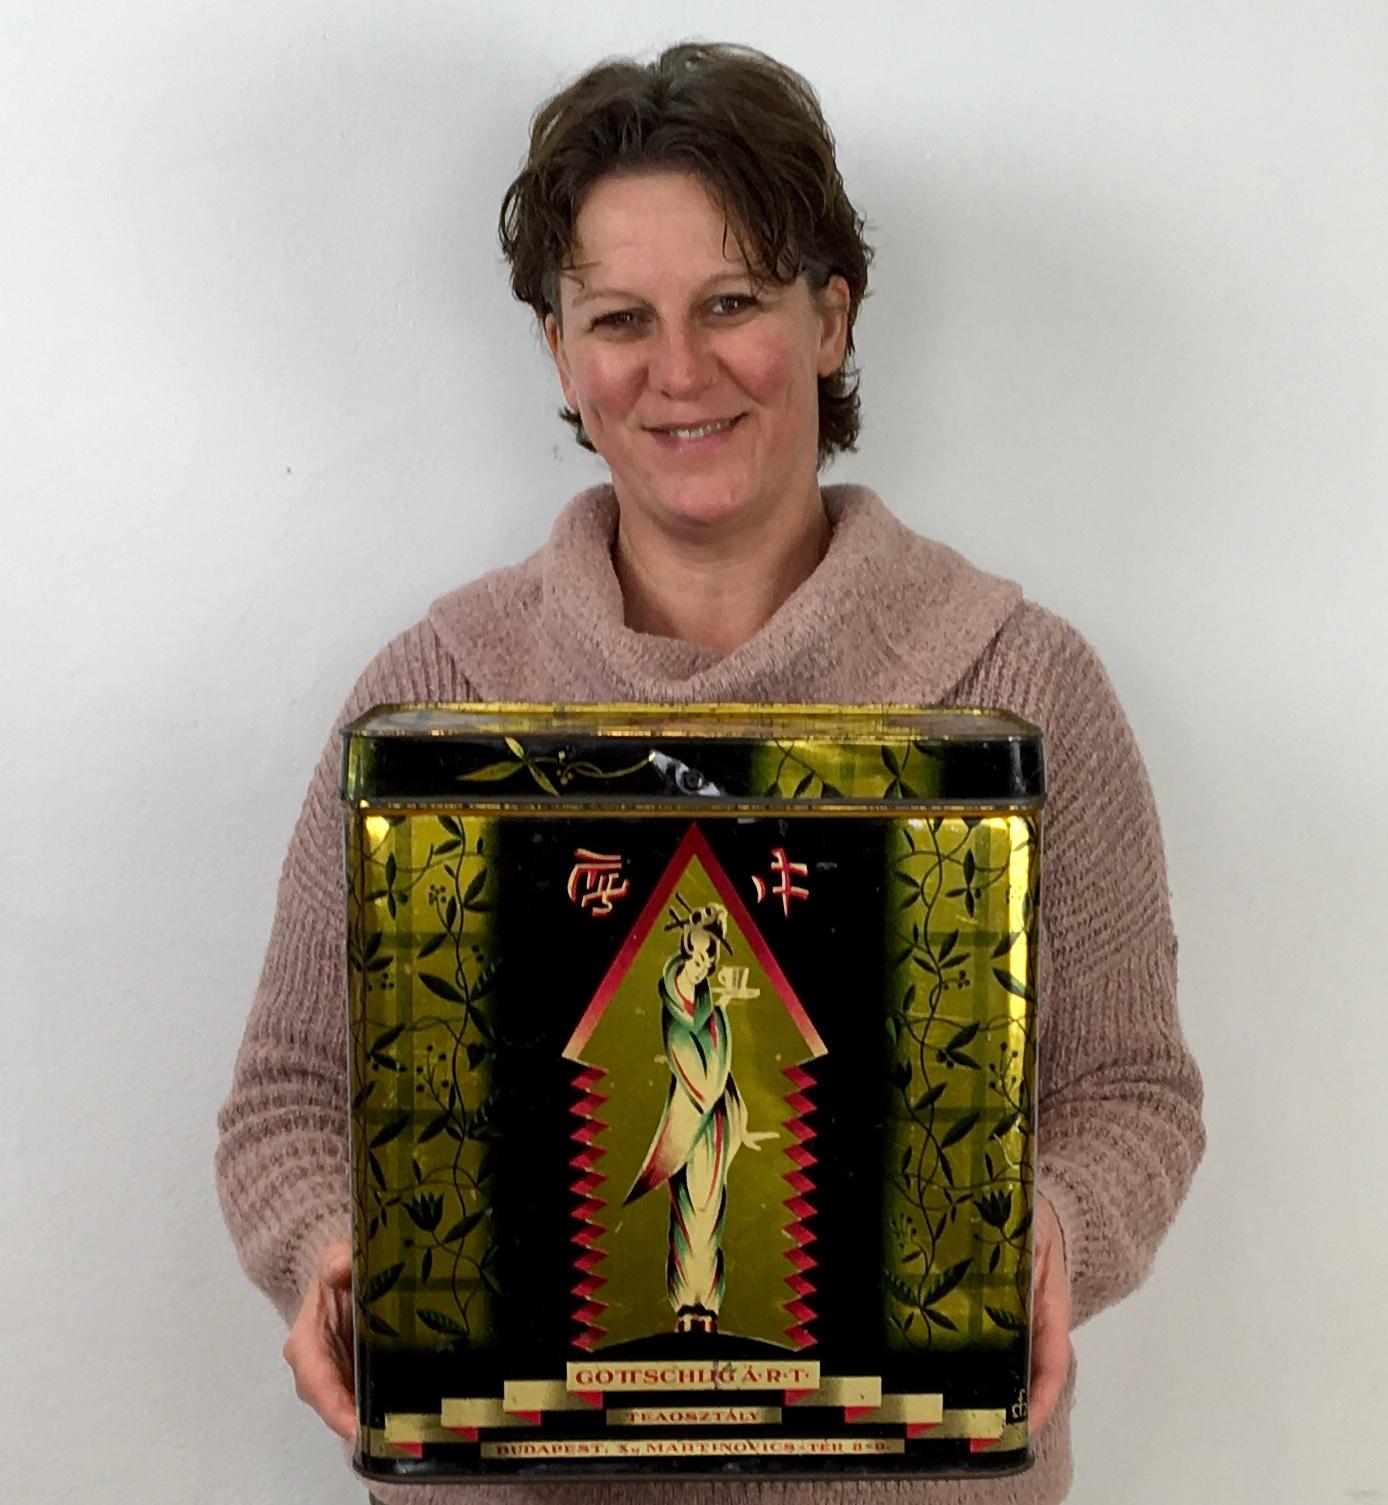 Tea Tin for Gottschlig Agoston, Budapest, Early 20th Century.
Gottschlig Agoston's trademark was rum, liqueur, cognac and tea. 
It's a large rectangular black and gold tin with on each side a different geisha. The corners are decorated with flowers.